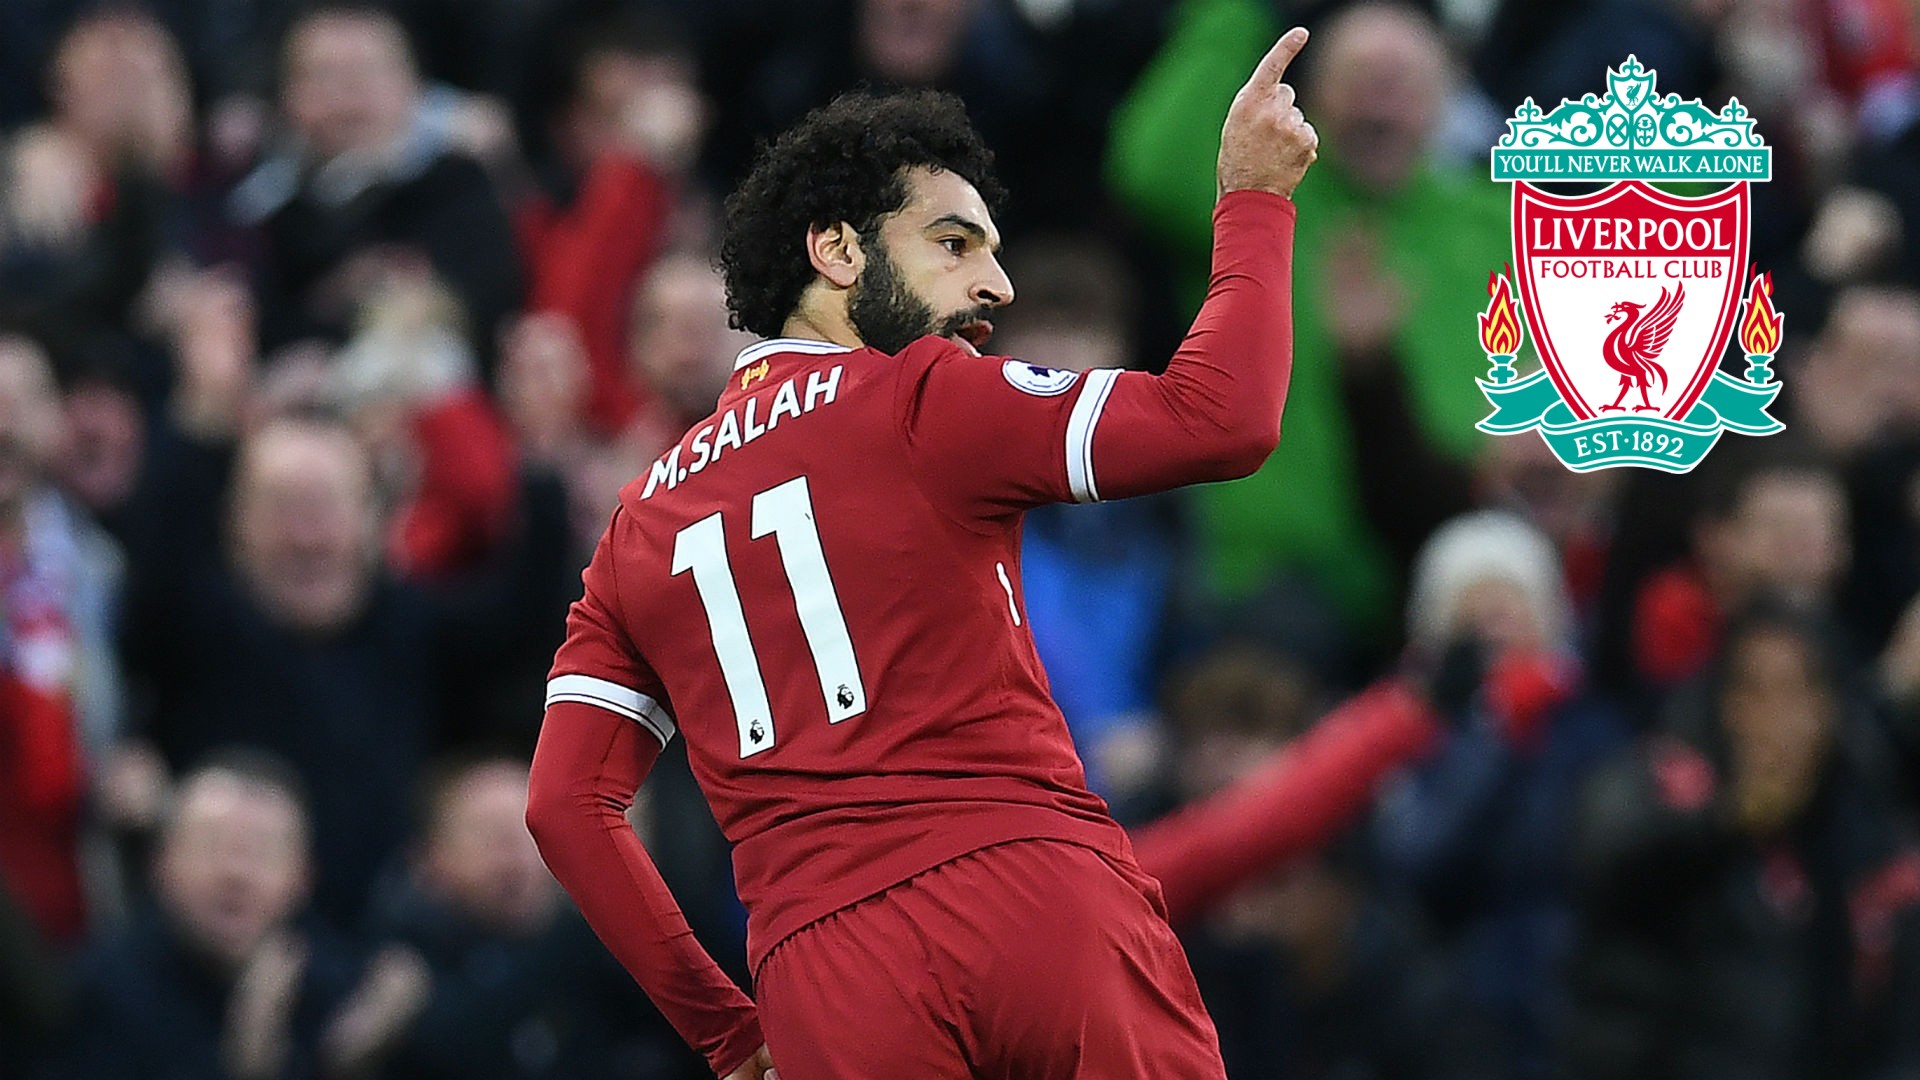 Best Mohamed Salah Liverpool Wallpaper HD With Resolution 1920X1080 pixel. You can make this wallpaper for your Desktop Computer Backgrounds, Mac Wallpapers, Android Lock screen or iPhone Screensavers